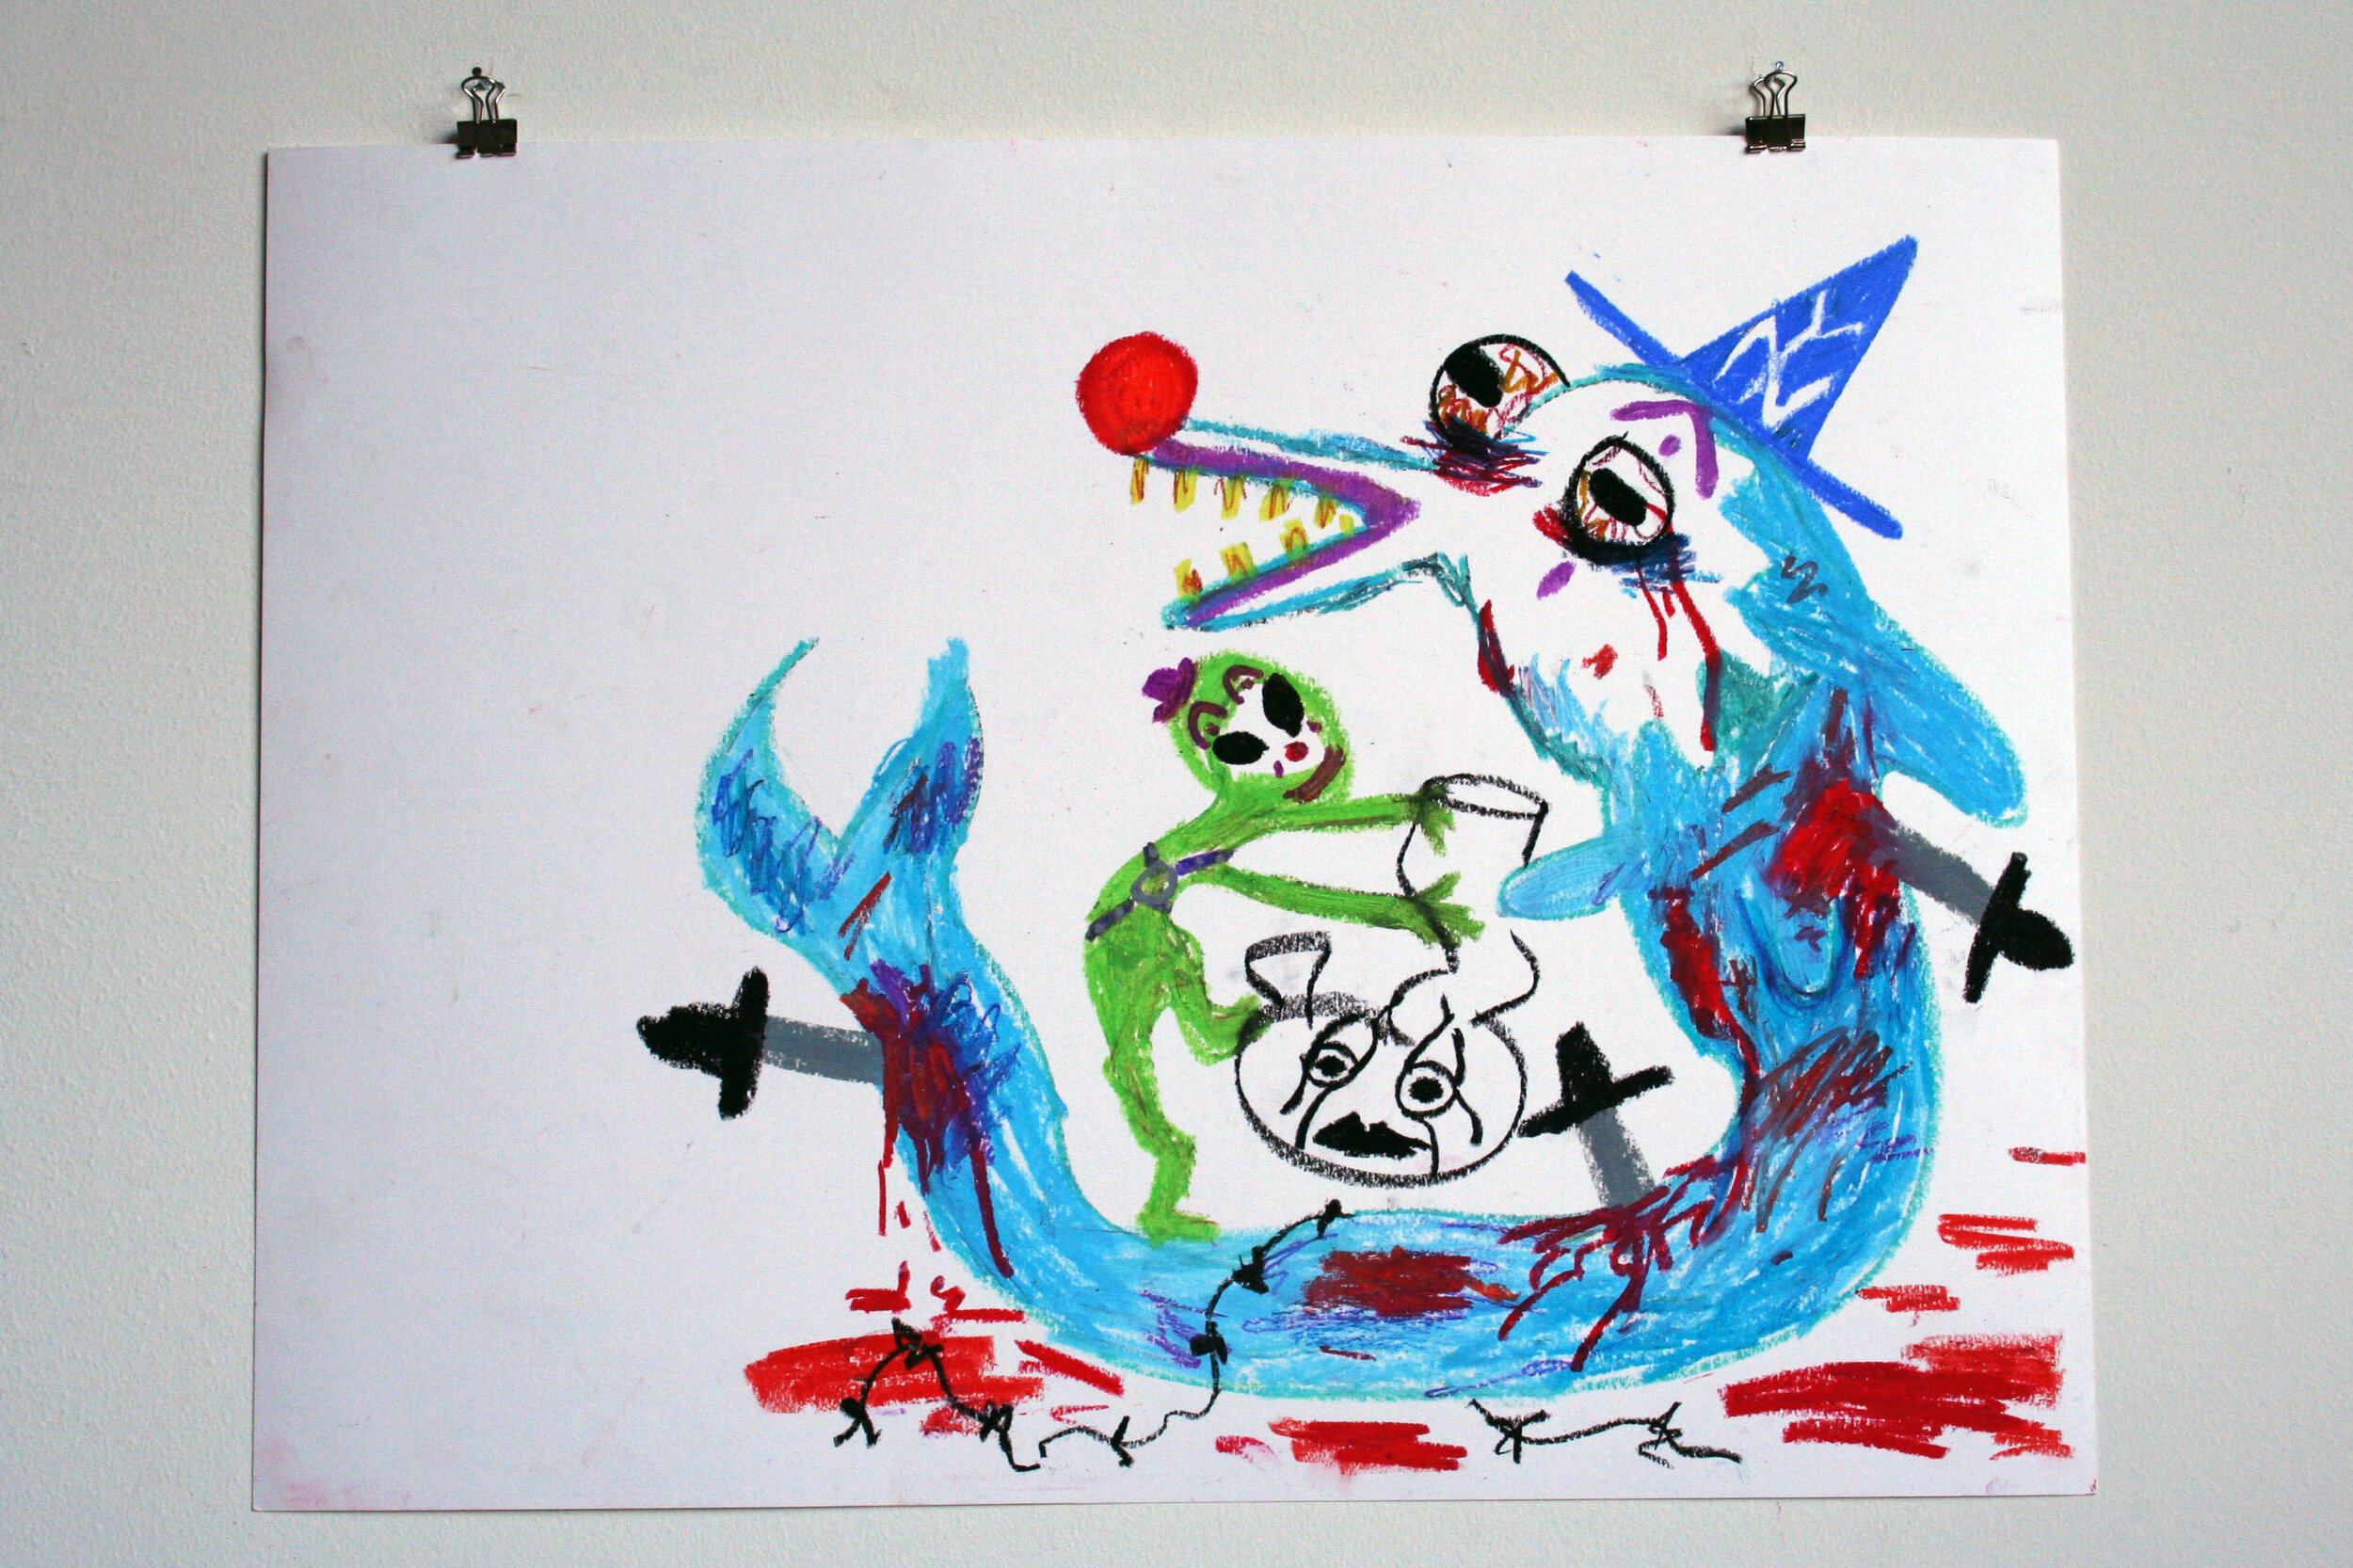   Dolphin Witch and Ghost Bong , 2014  18 x 24 inches (45.72 x 60.96 cm.)  Oil pastel on paper 